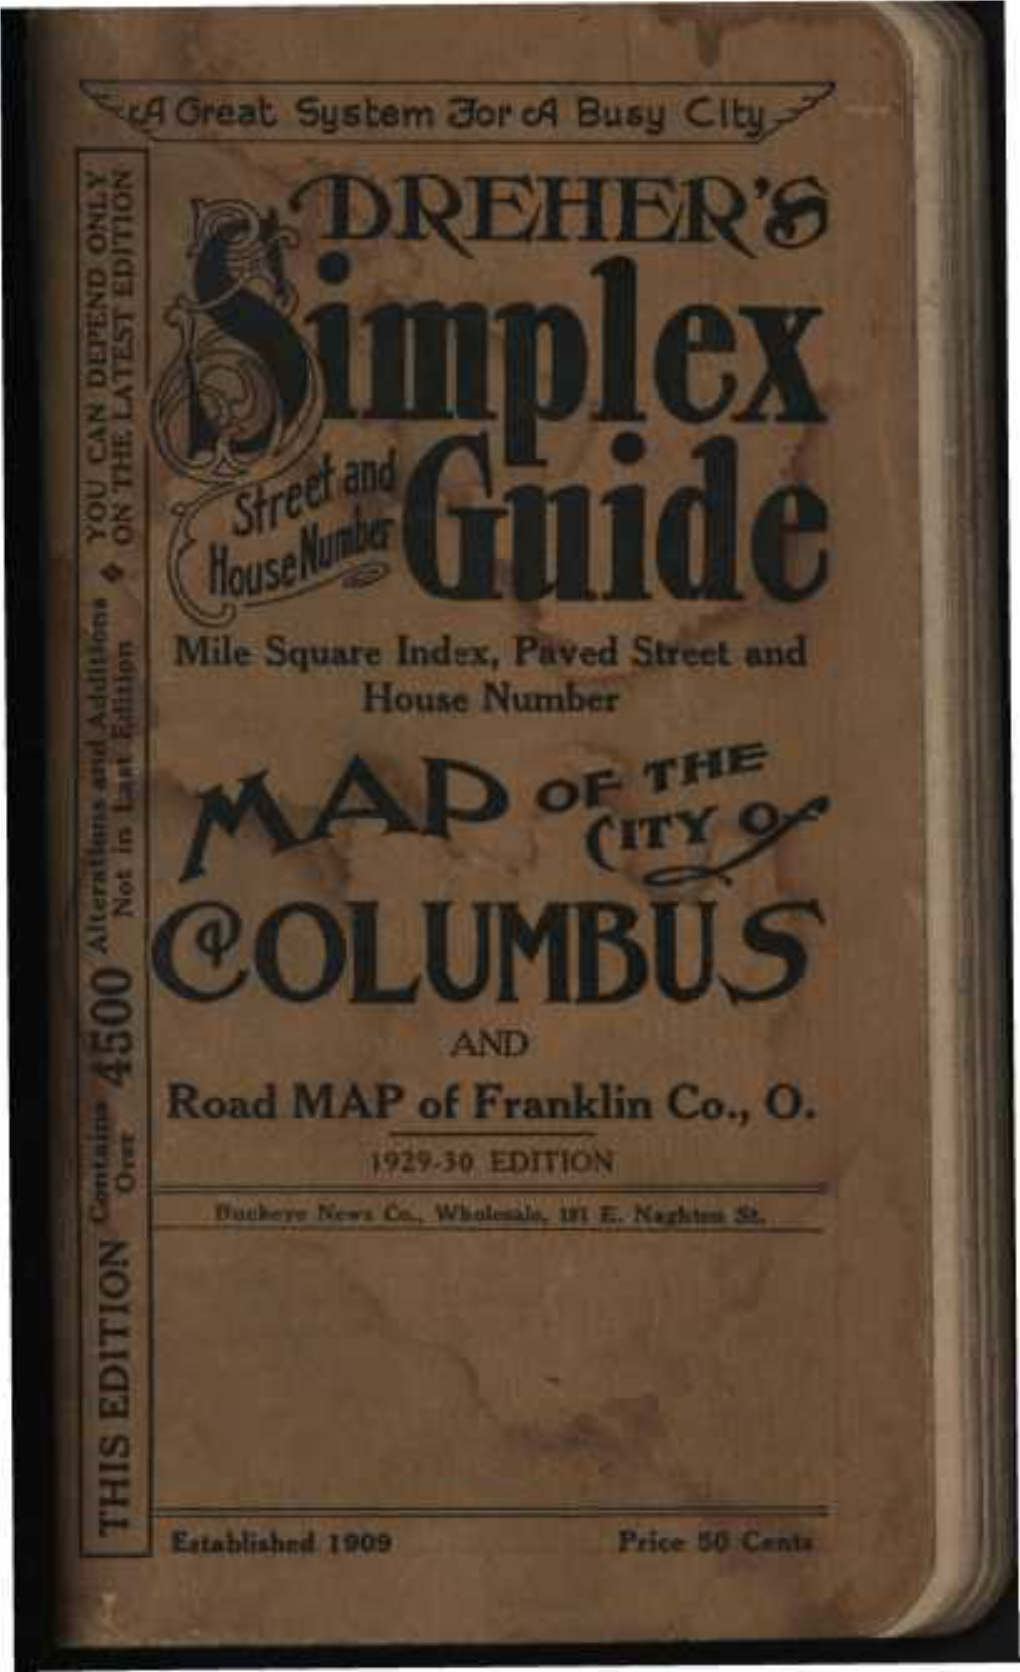 *Gtinide •5 C .- O Mile Square Index, Paved Street and 3*5 House Number Of-**** §C 5! 60LUMBU5 and Road MAP of Franklin Co., O